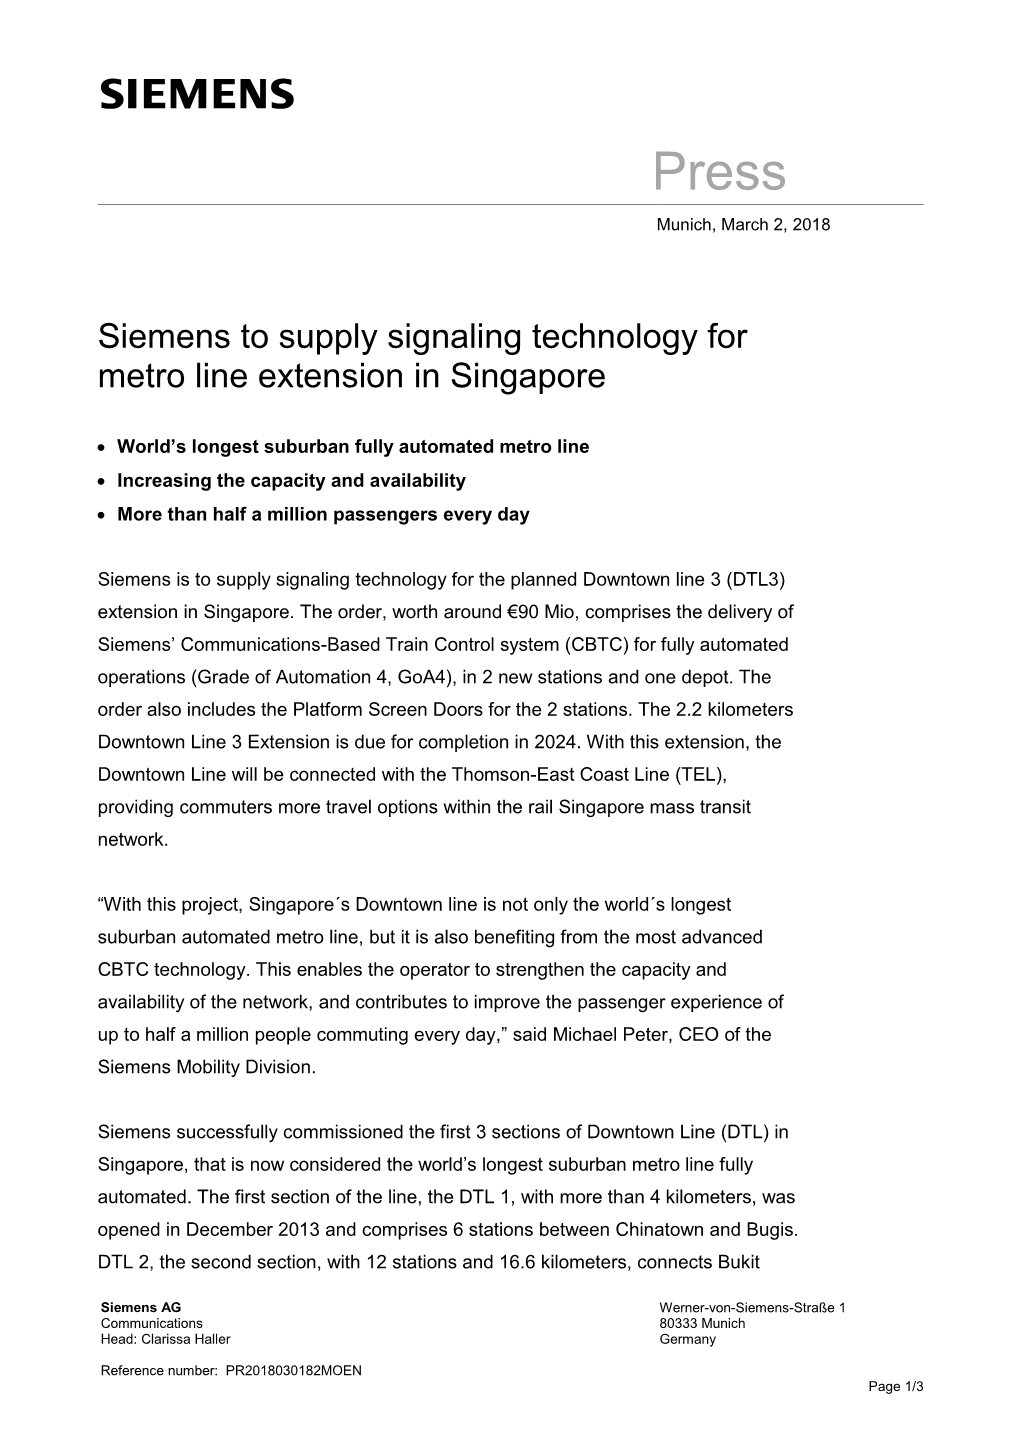 Siemens to Supply Signaling Technology for Metro Line Extension in Singapore